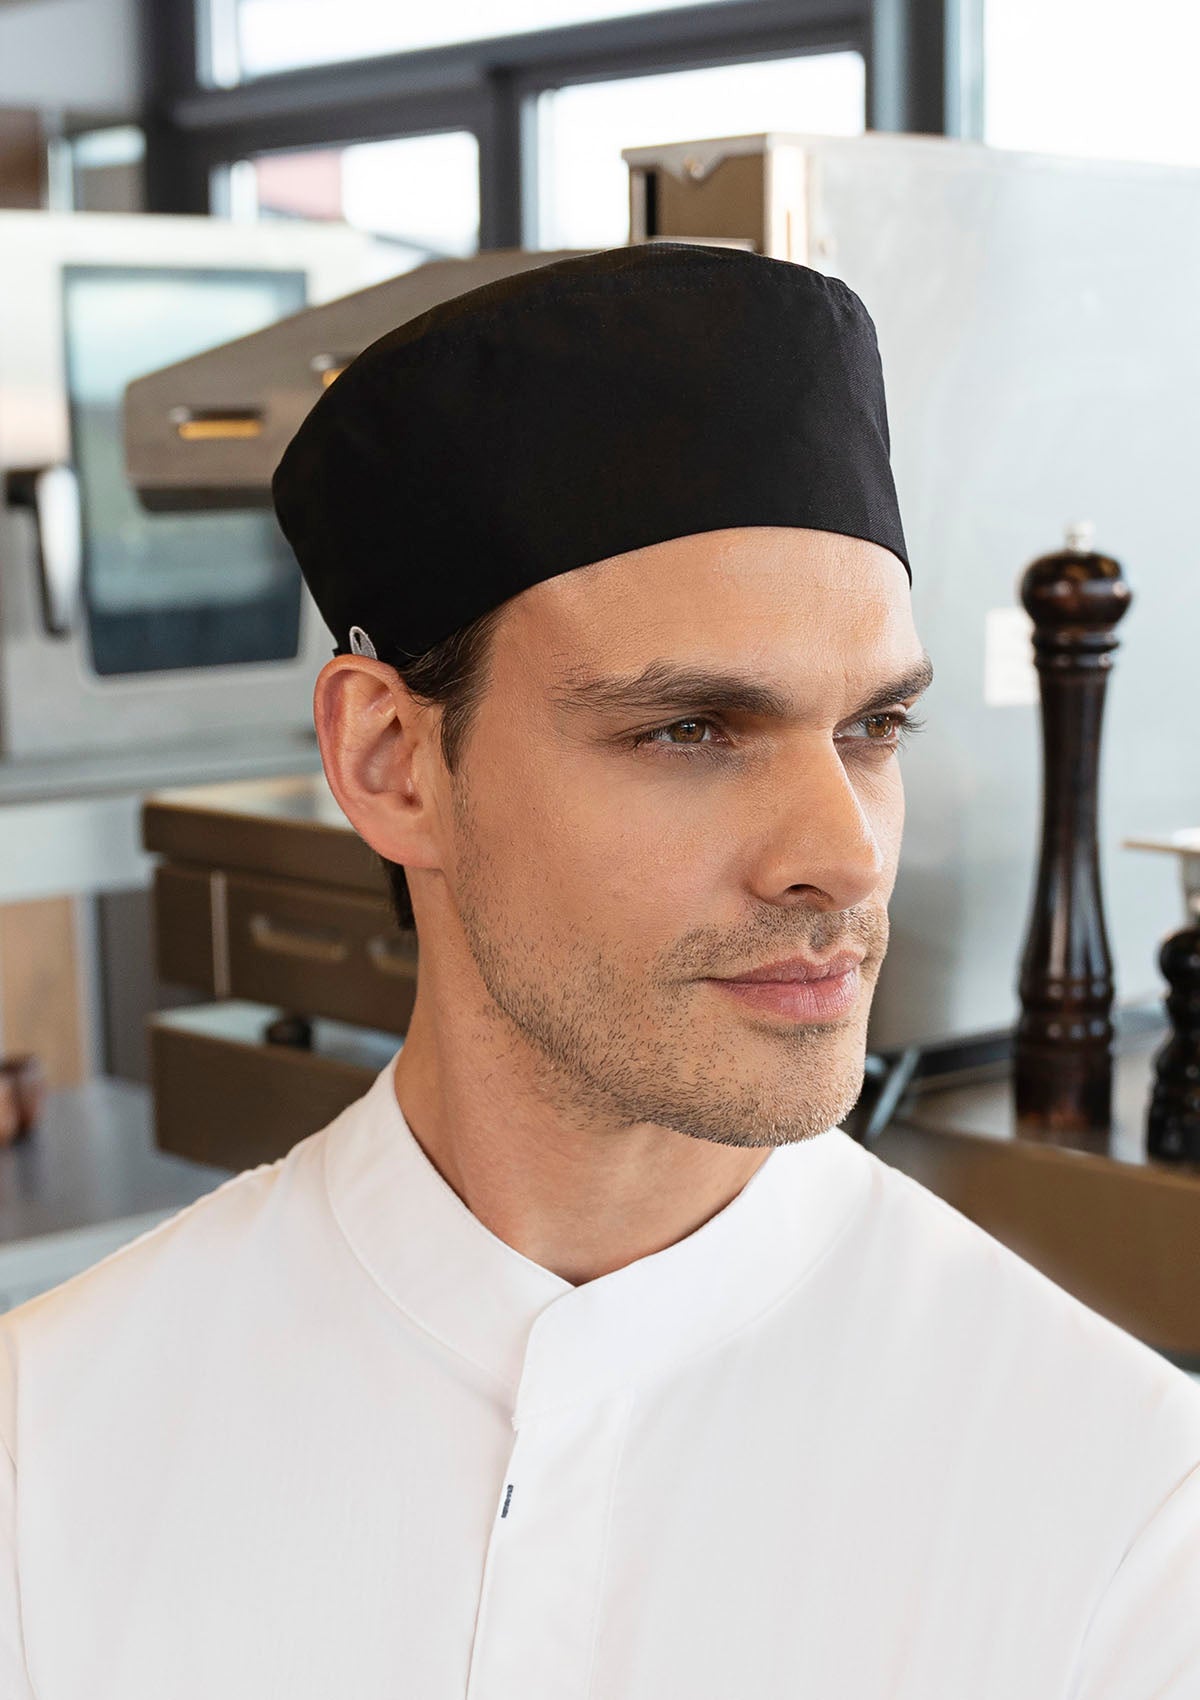 Chef Hat Beanie with Breathable Mesh Insert